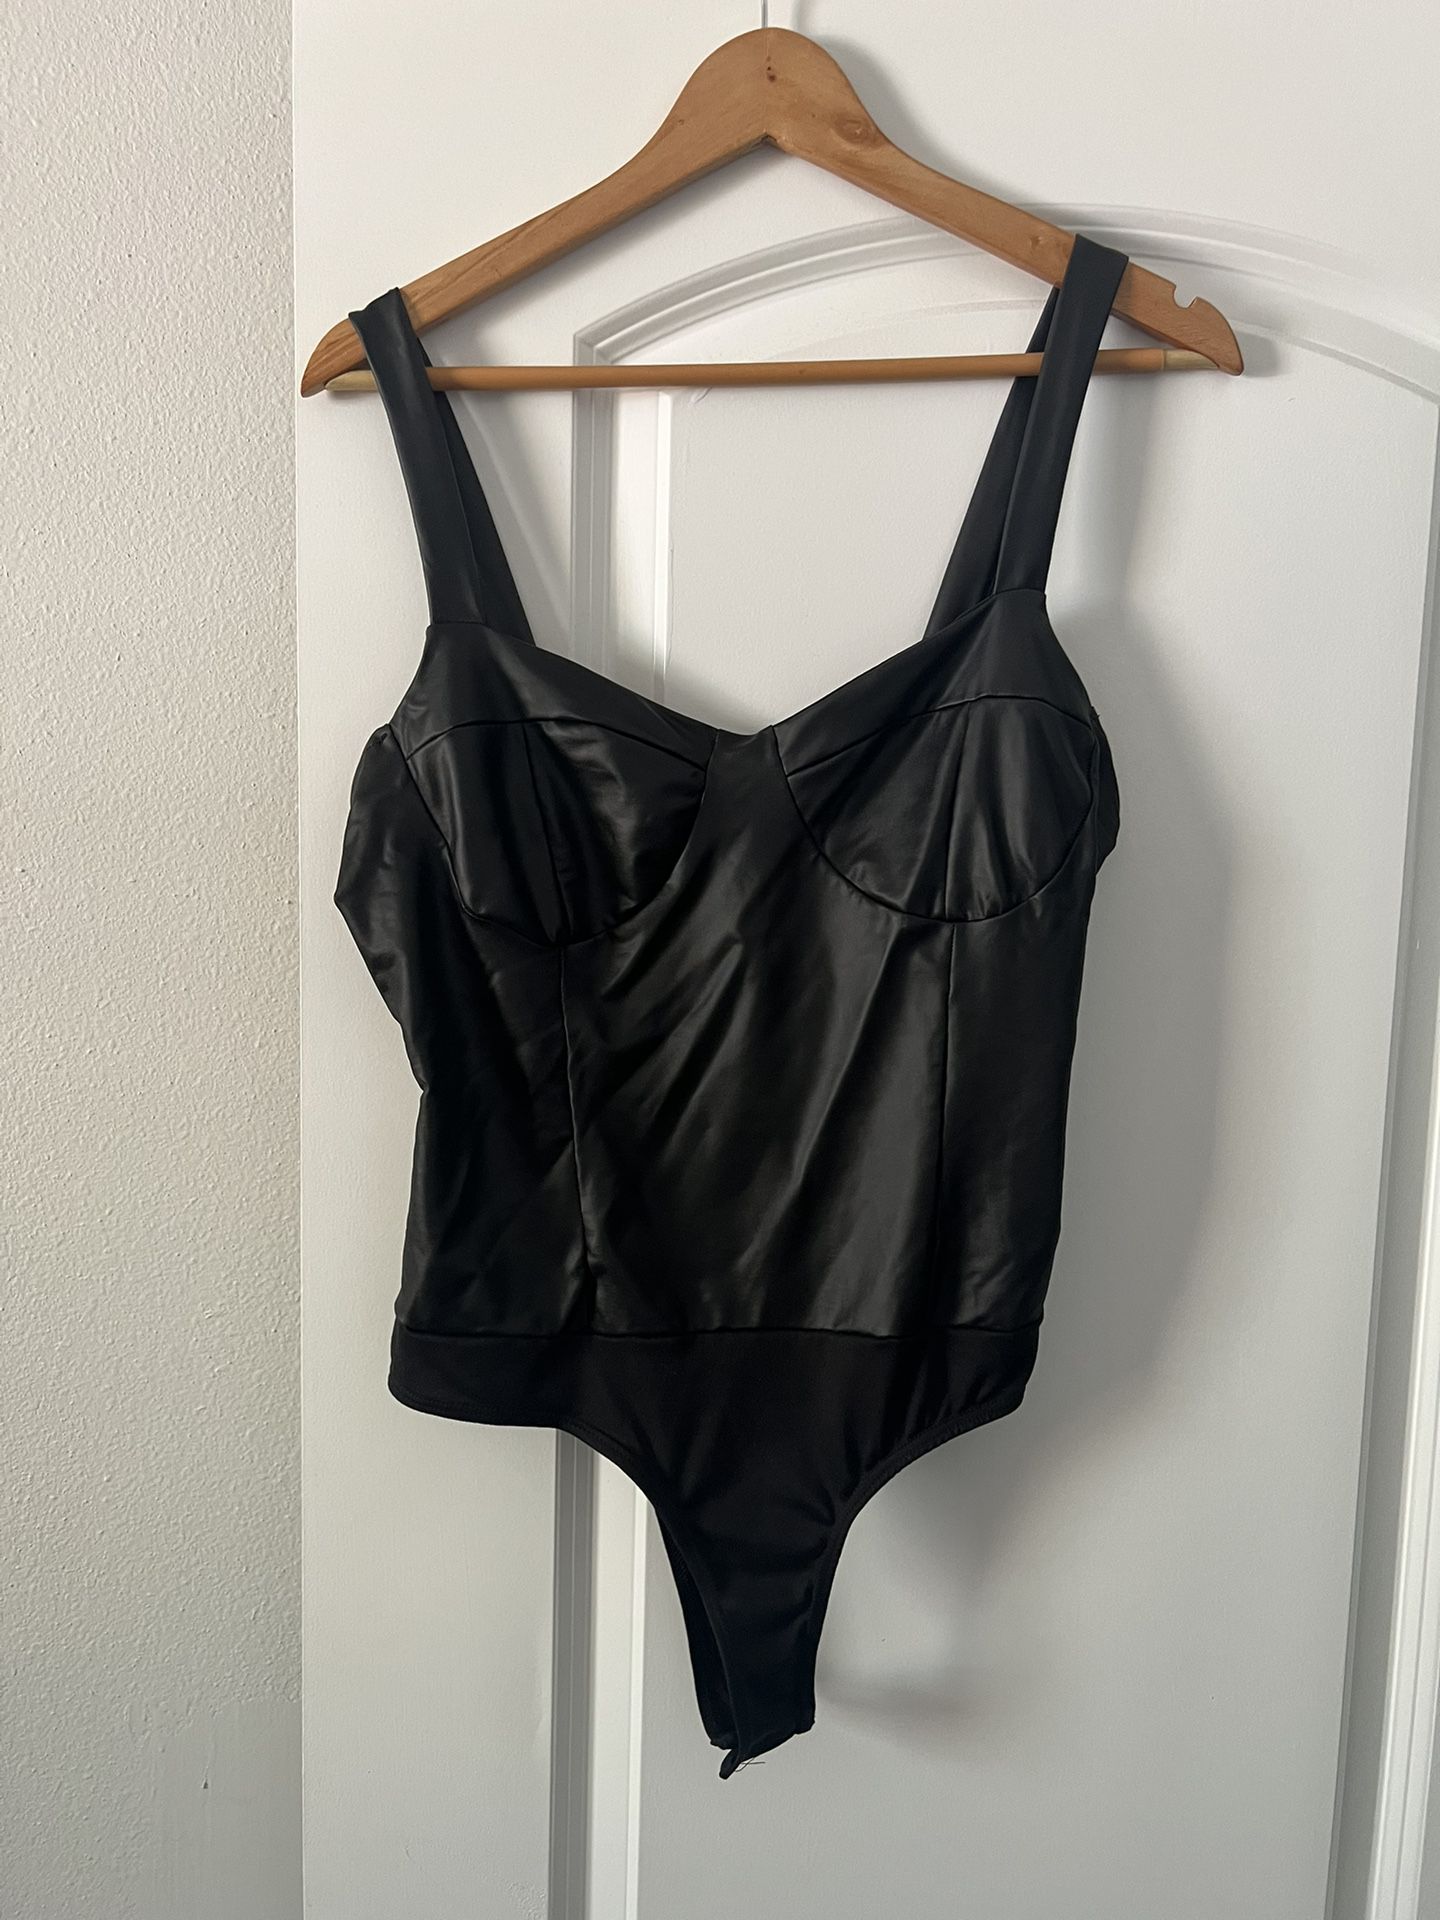 Black Faux Leather Bodysuit for Sale in Canyon Country, CA - OfferUp